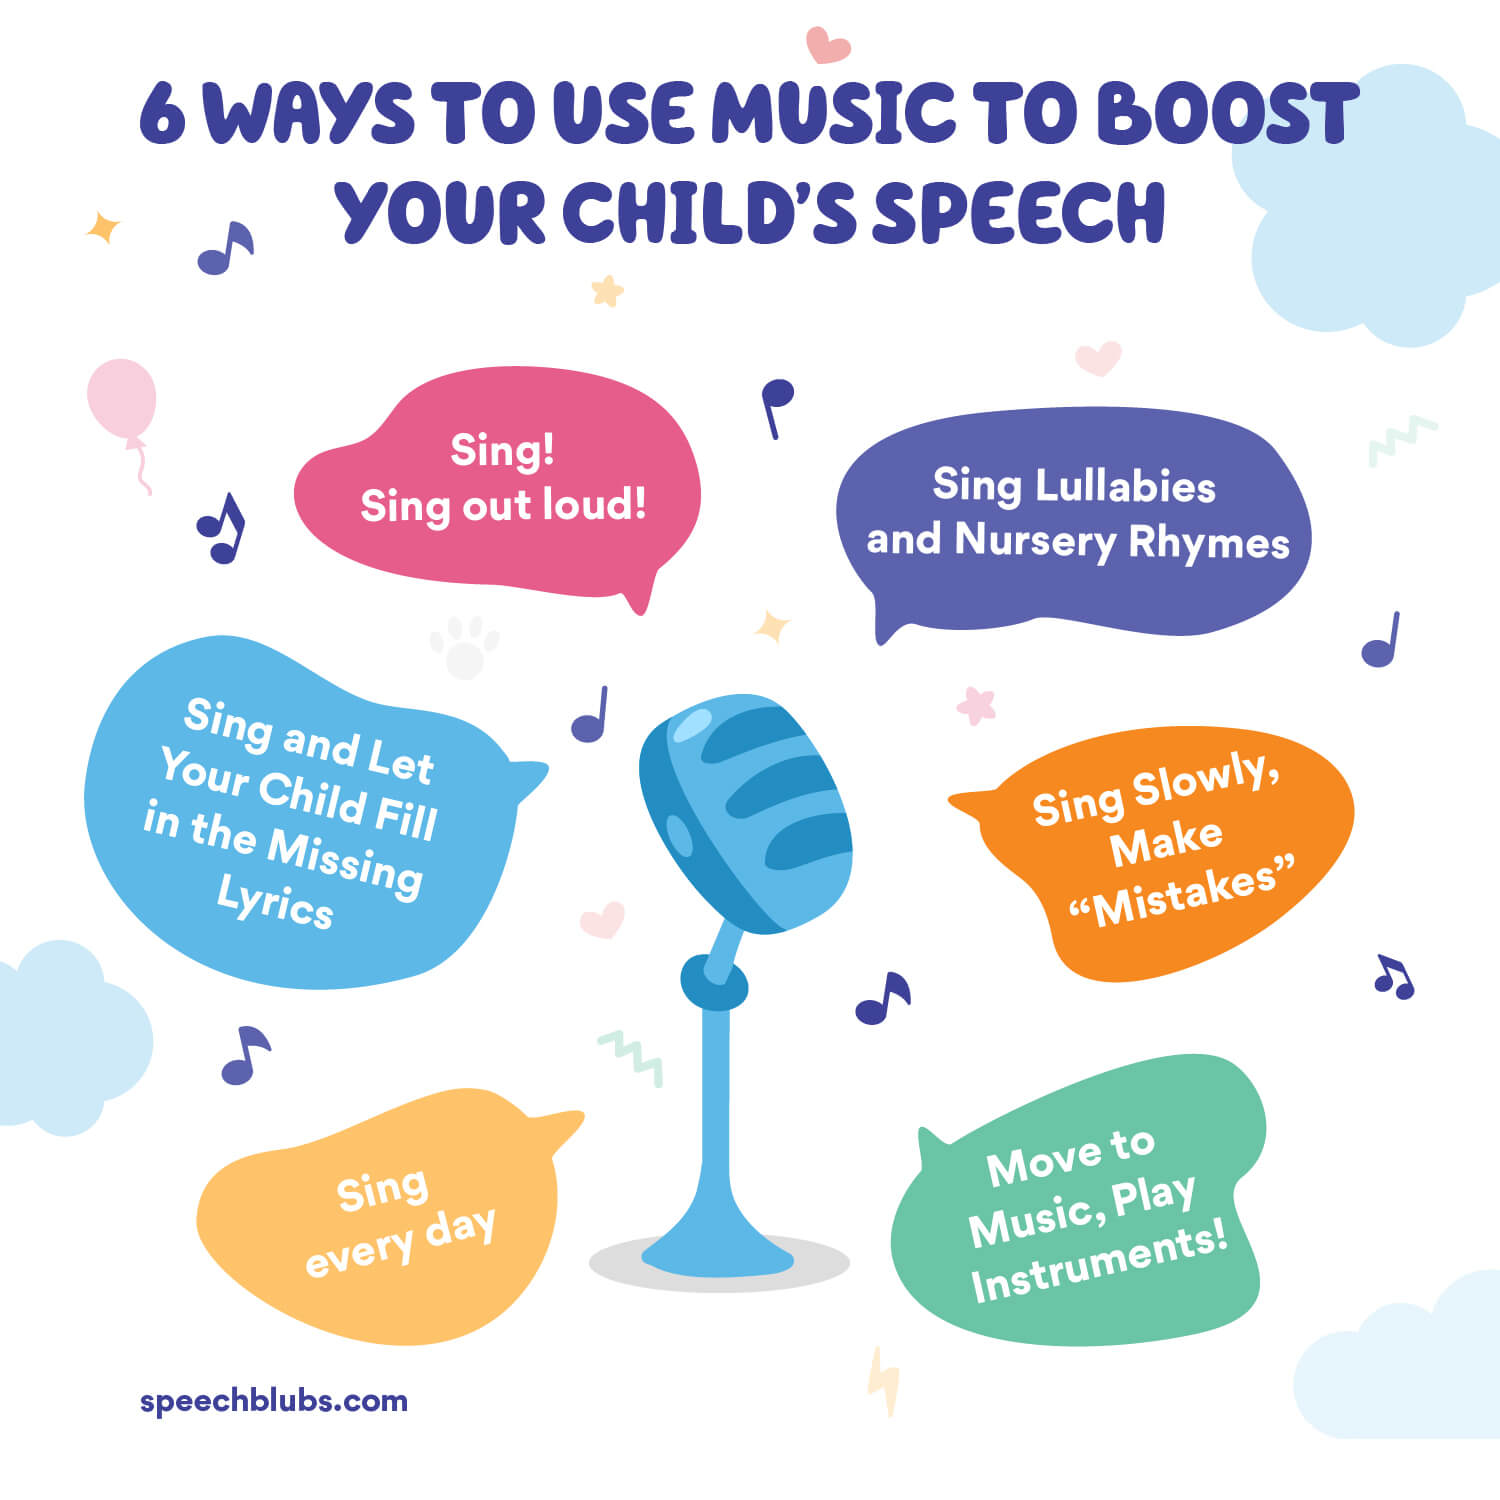 6 Ways To Use Music To Boost Your Child's Speech